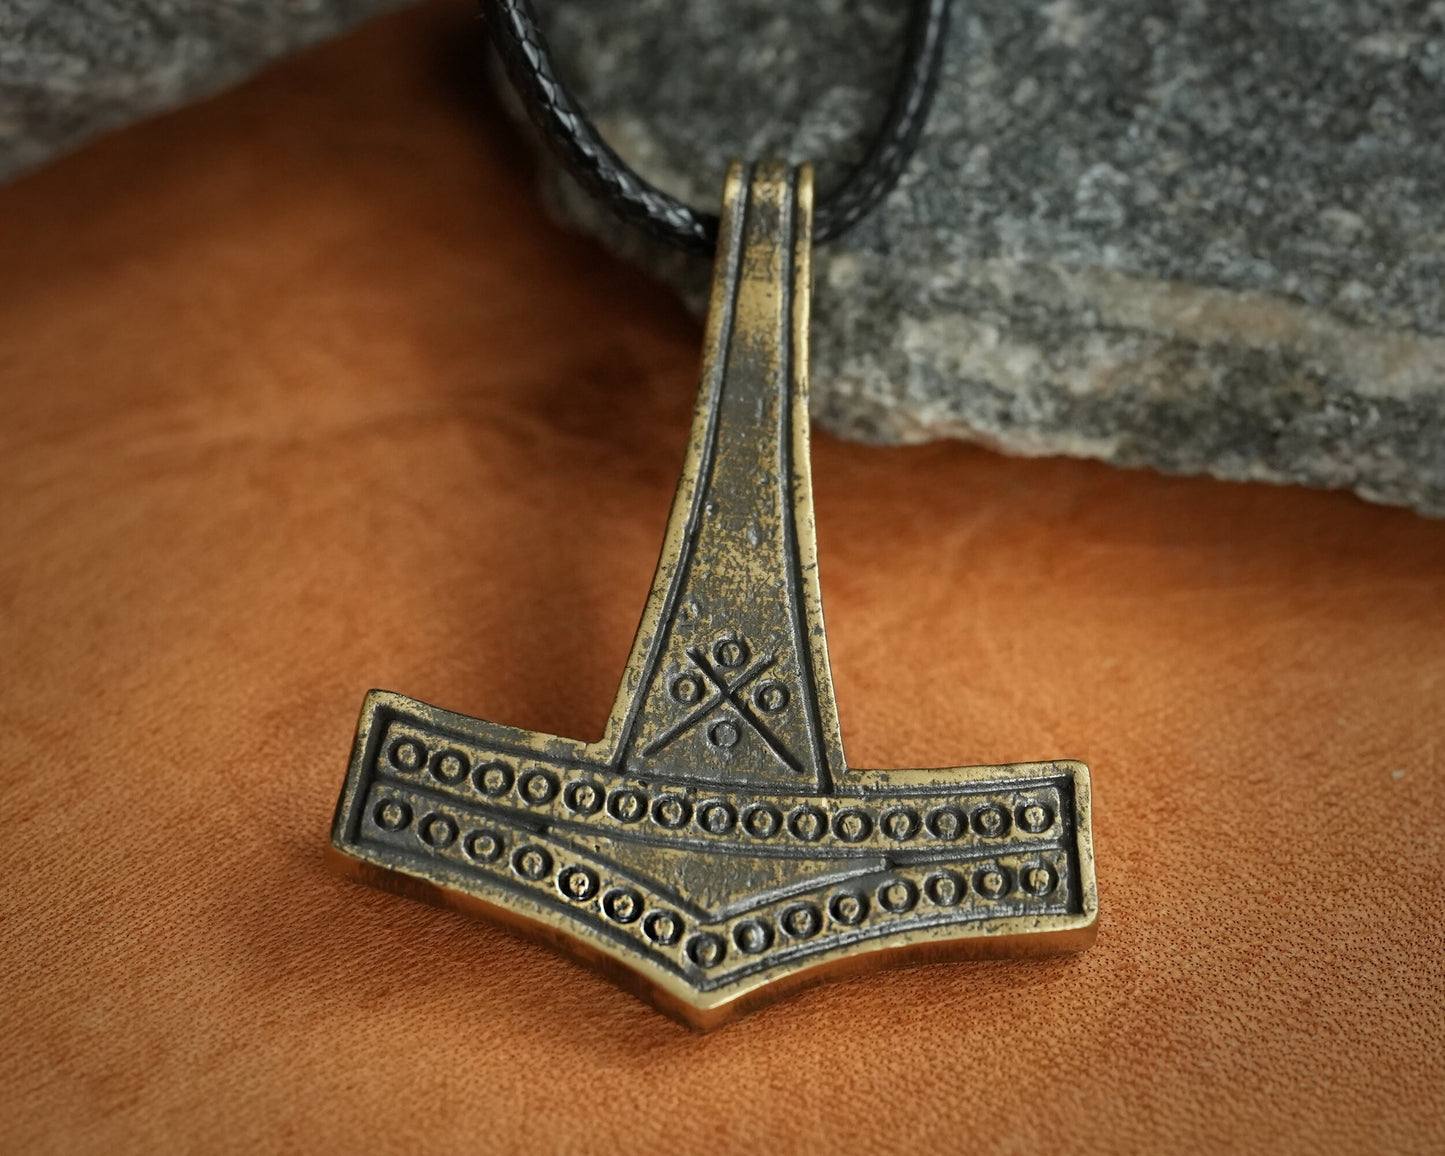 Romersdal Authentic Replica Thors Hammer Necklace Pendant Mjölnir Viking Norse Jewelry Thor Mjolnir Gifts for Men Brass  925 Sterling Silver - Baldur Jewelry